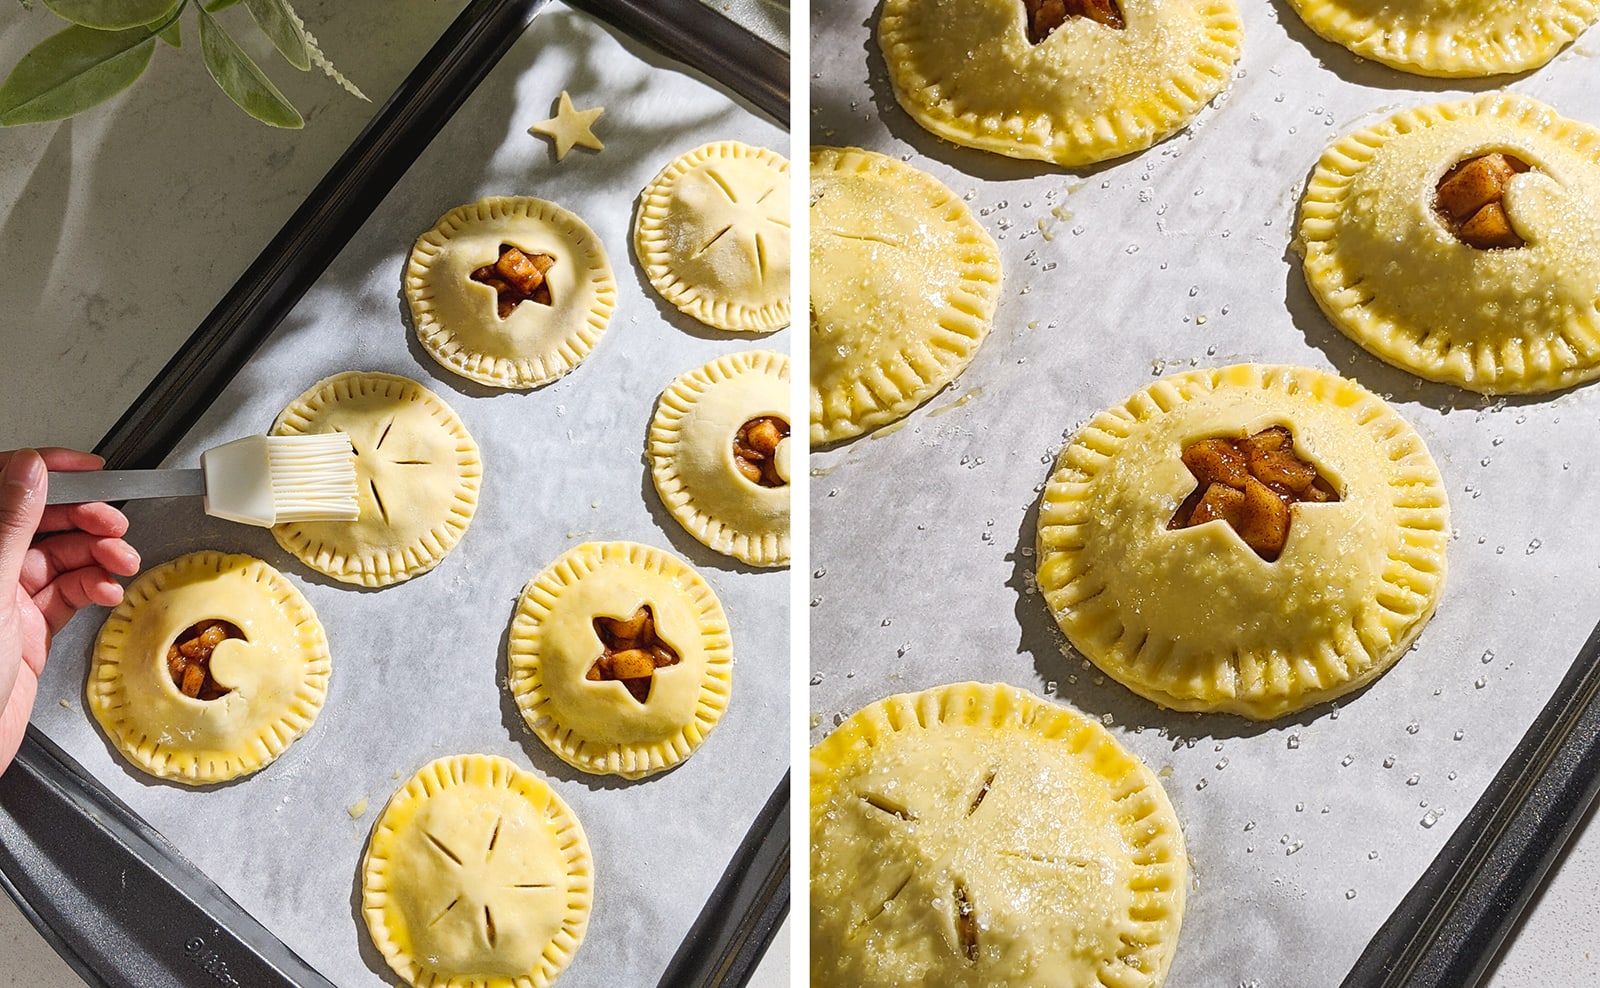 Left to right: brushing apple hand pies with egg wash, apple hand pies pre-bake showing the egg wash and sugar crystals.